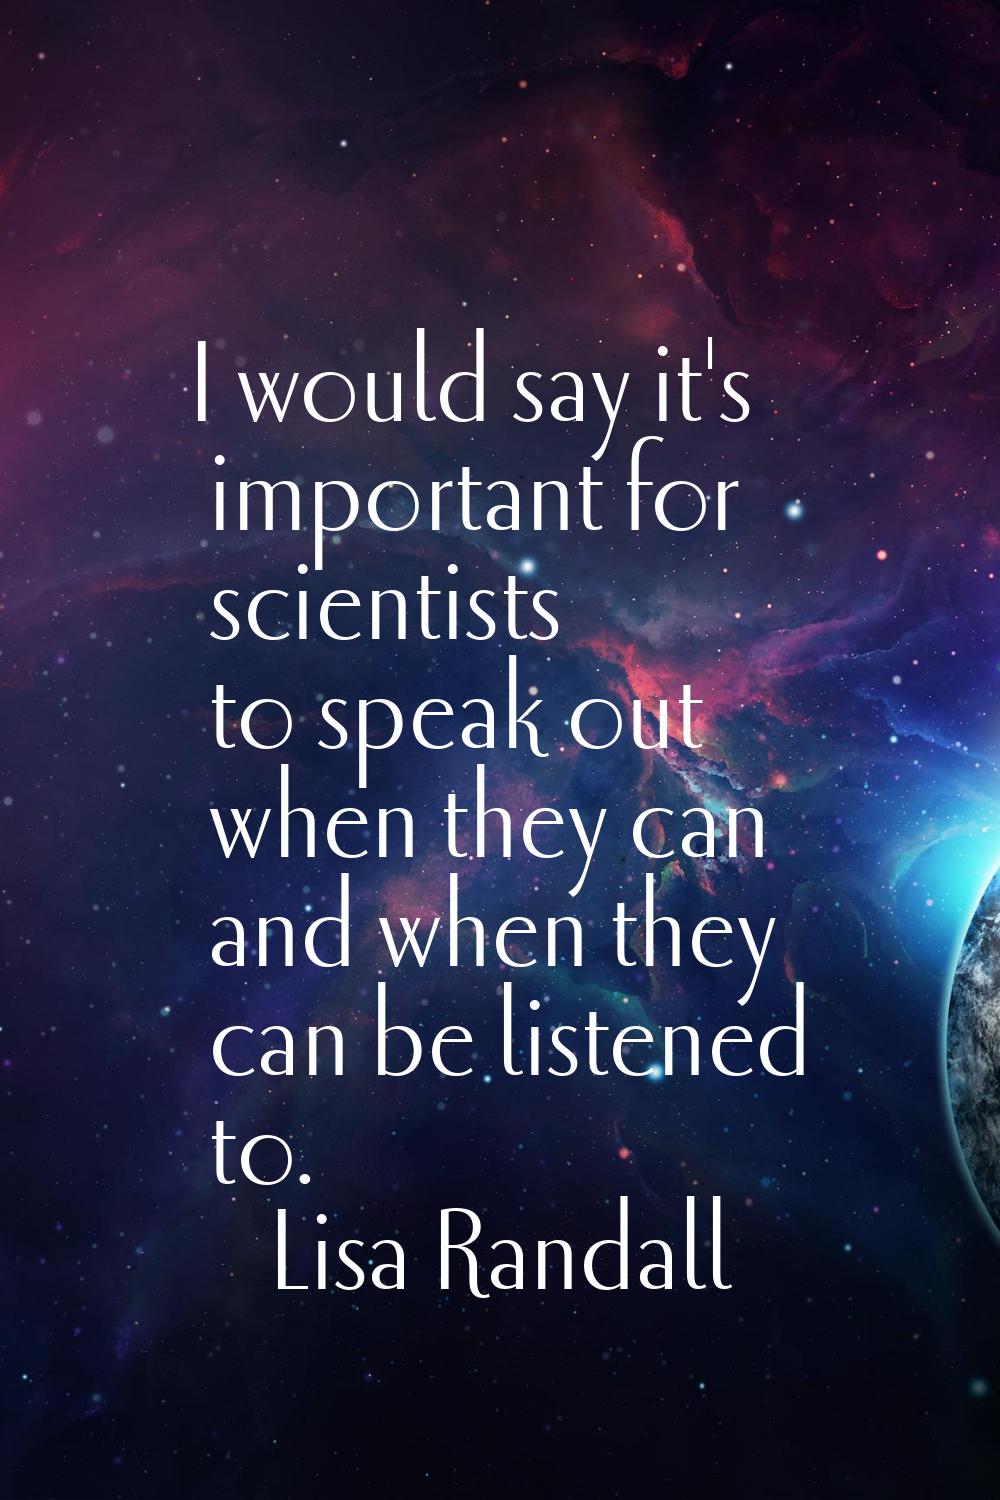 I would say it's important for scientists to speak out when they can and when they can be listened 